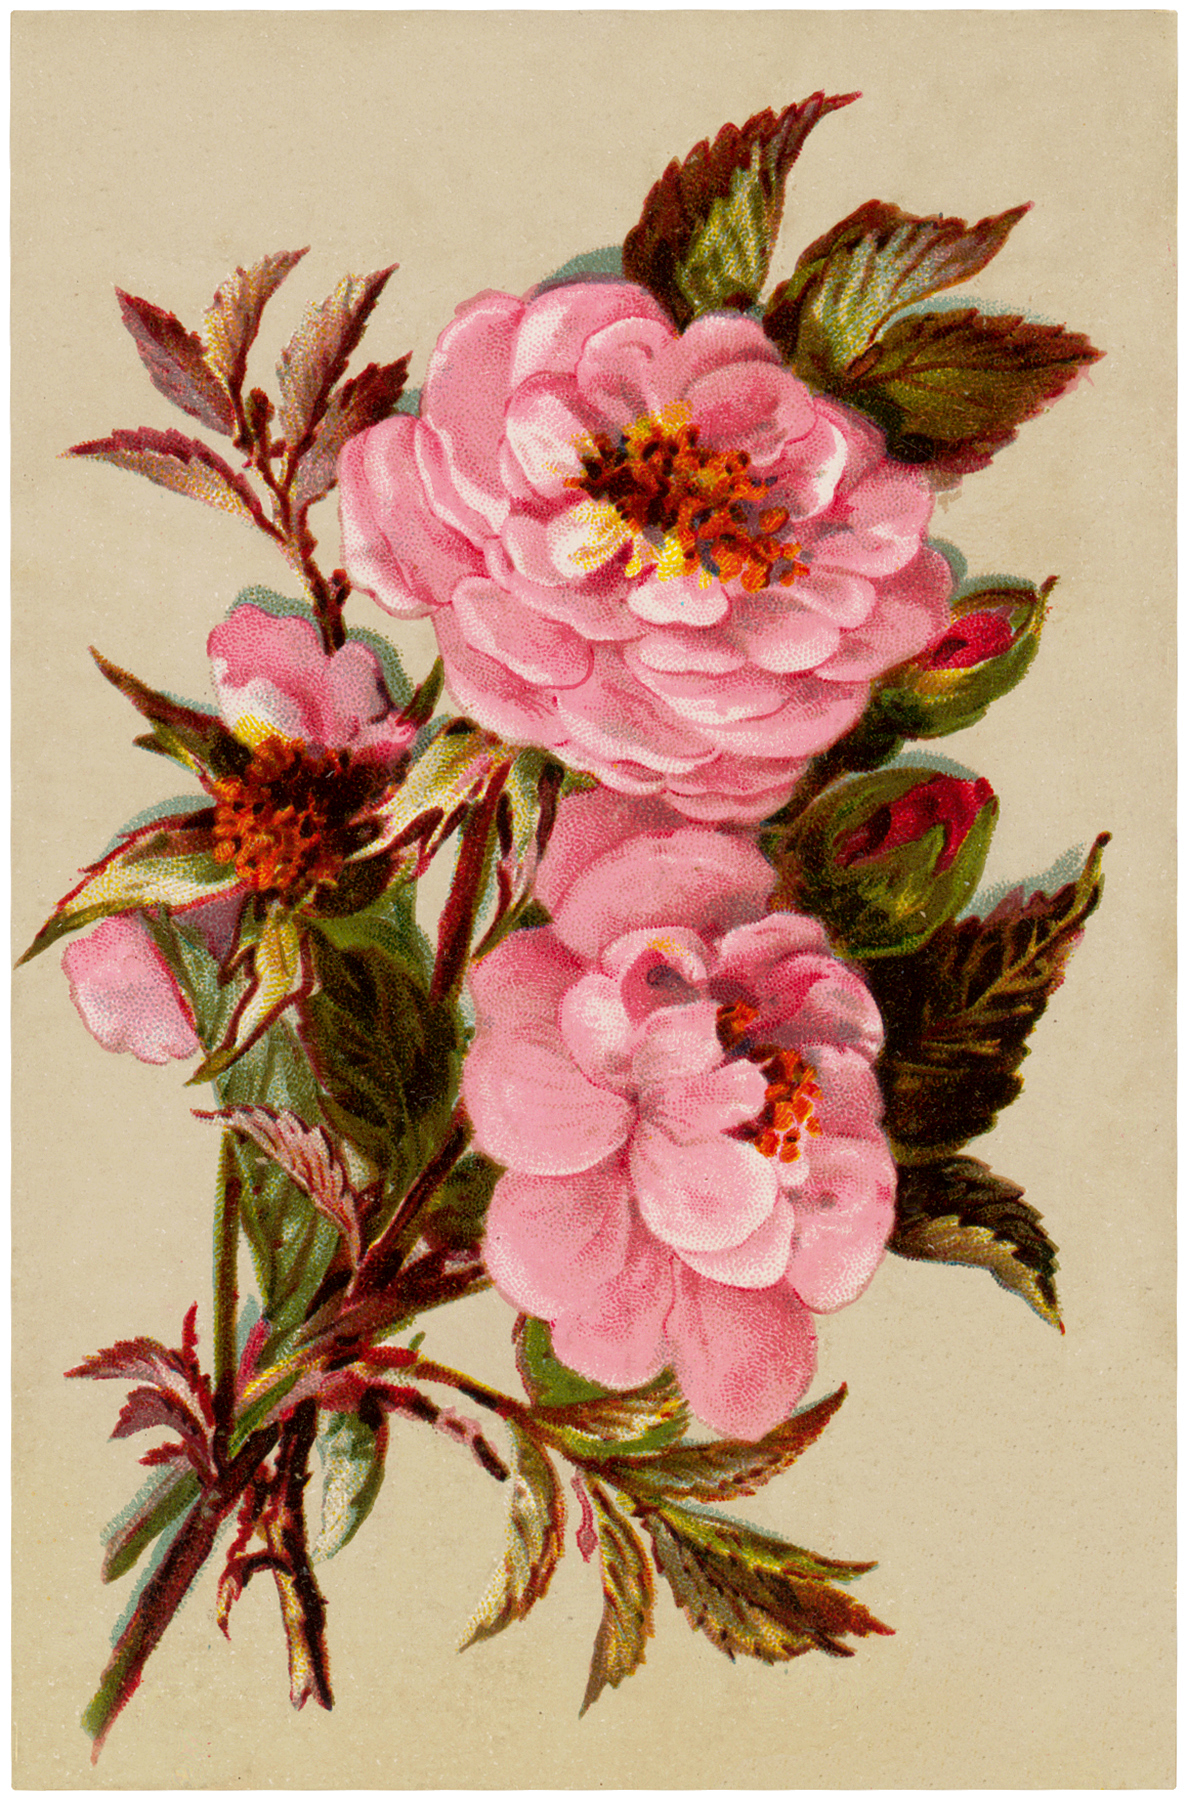 Free Vintage Pink Roses Image - The Graphics Fairy